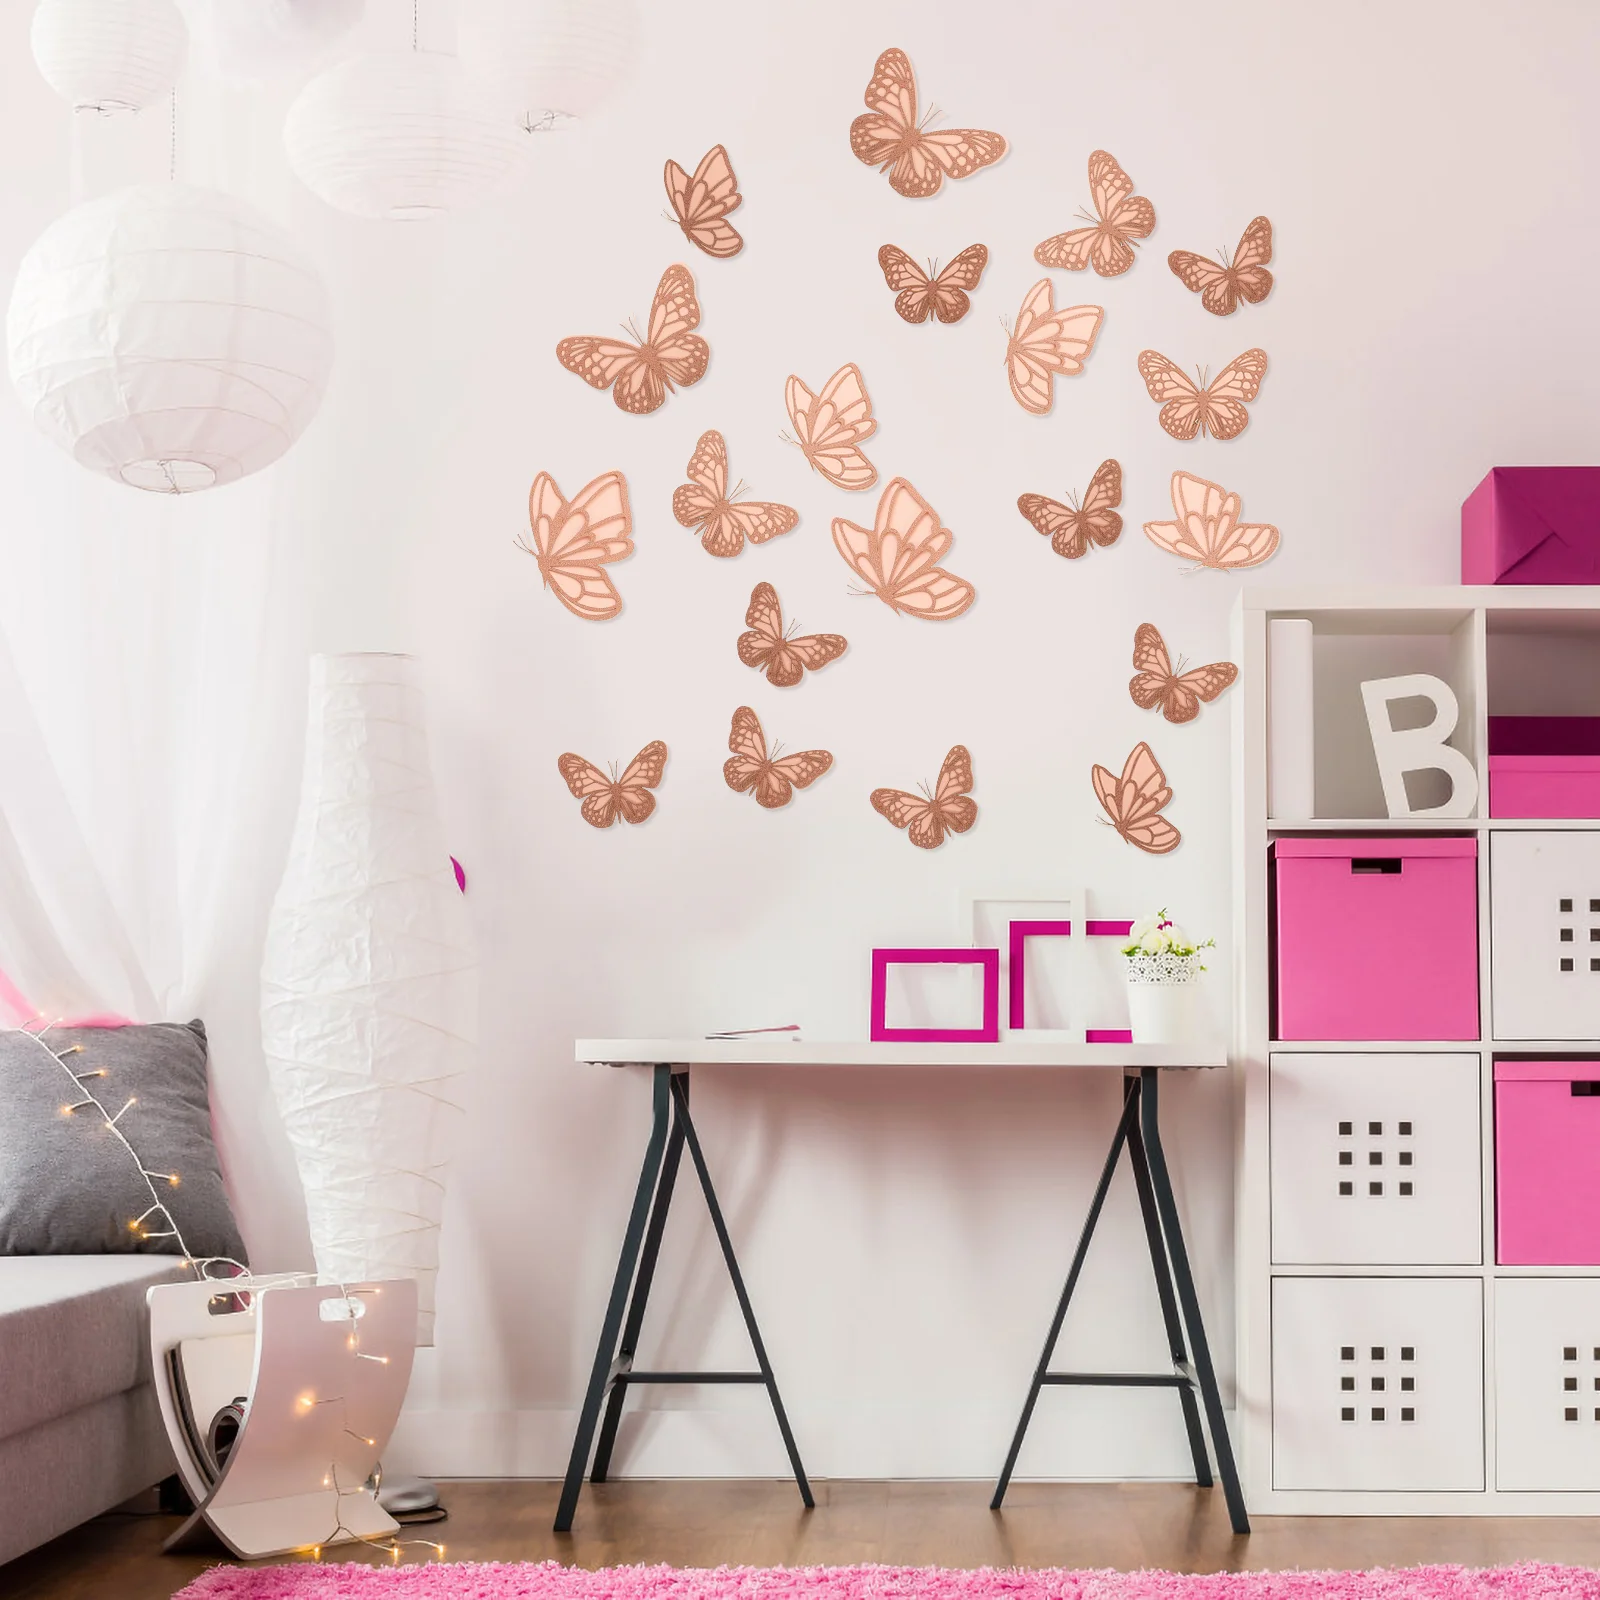 

Butterfly Wall Home Decor Home Decors Paper Butterflies Mural Removable Window Clings 3d Ornament